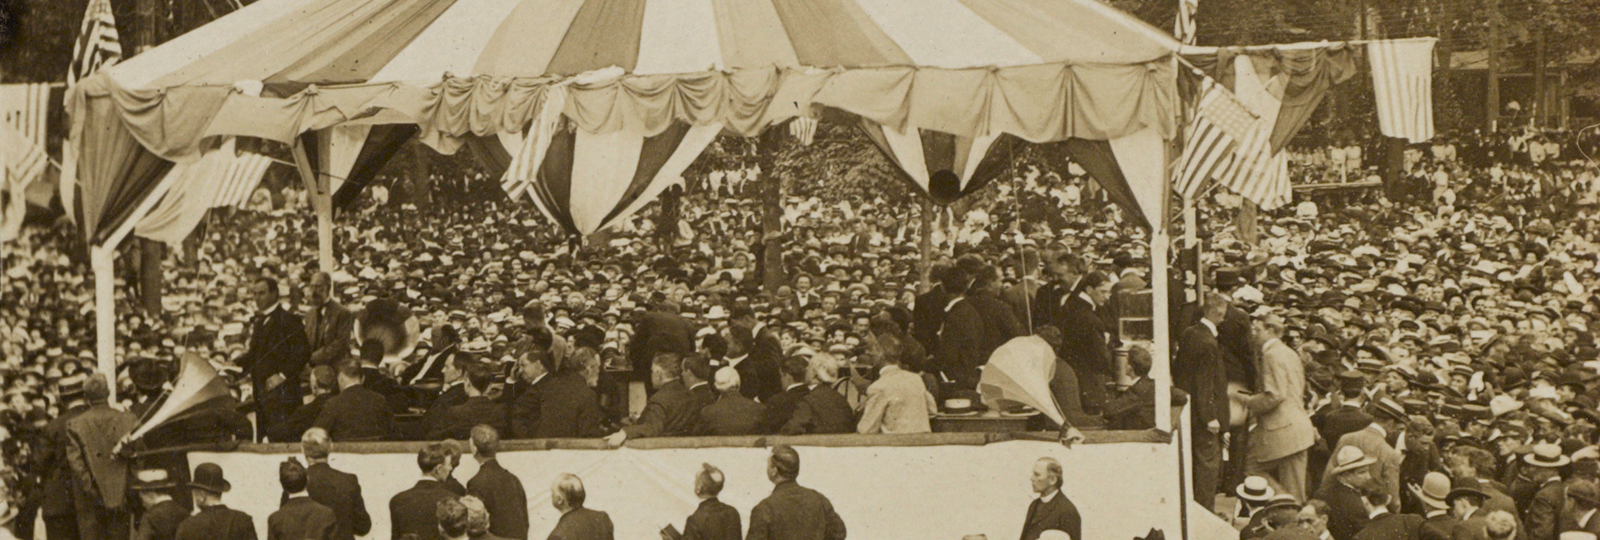 John Mitchell addressing C.T.A.U. delegates and the United Mine Workers of America at Wilkes-Barre, Pa., Aug. 10, 1905. (Library of Congress Prints and Photographs Division Washington, D.C.)